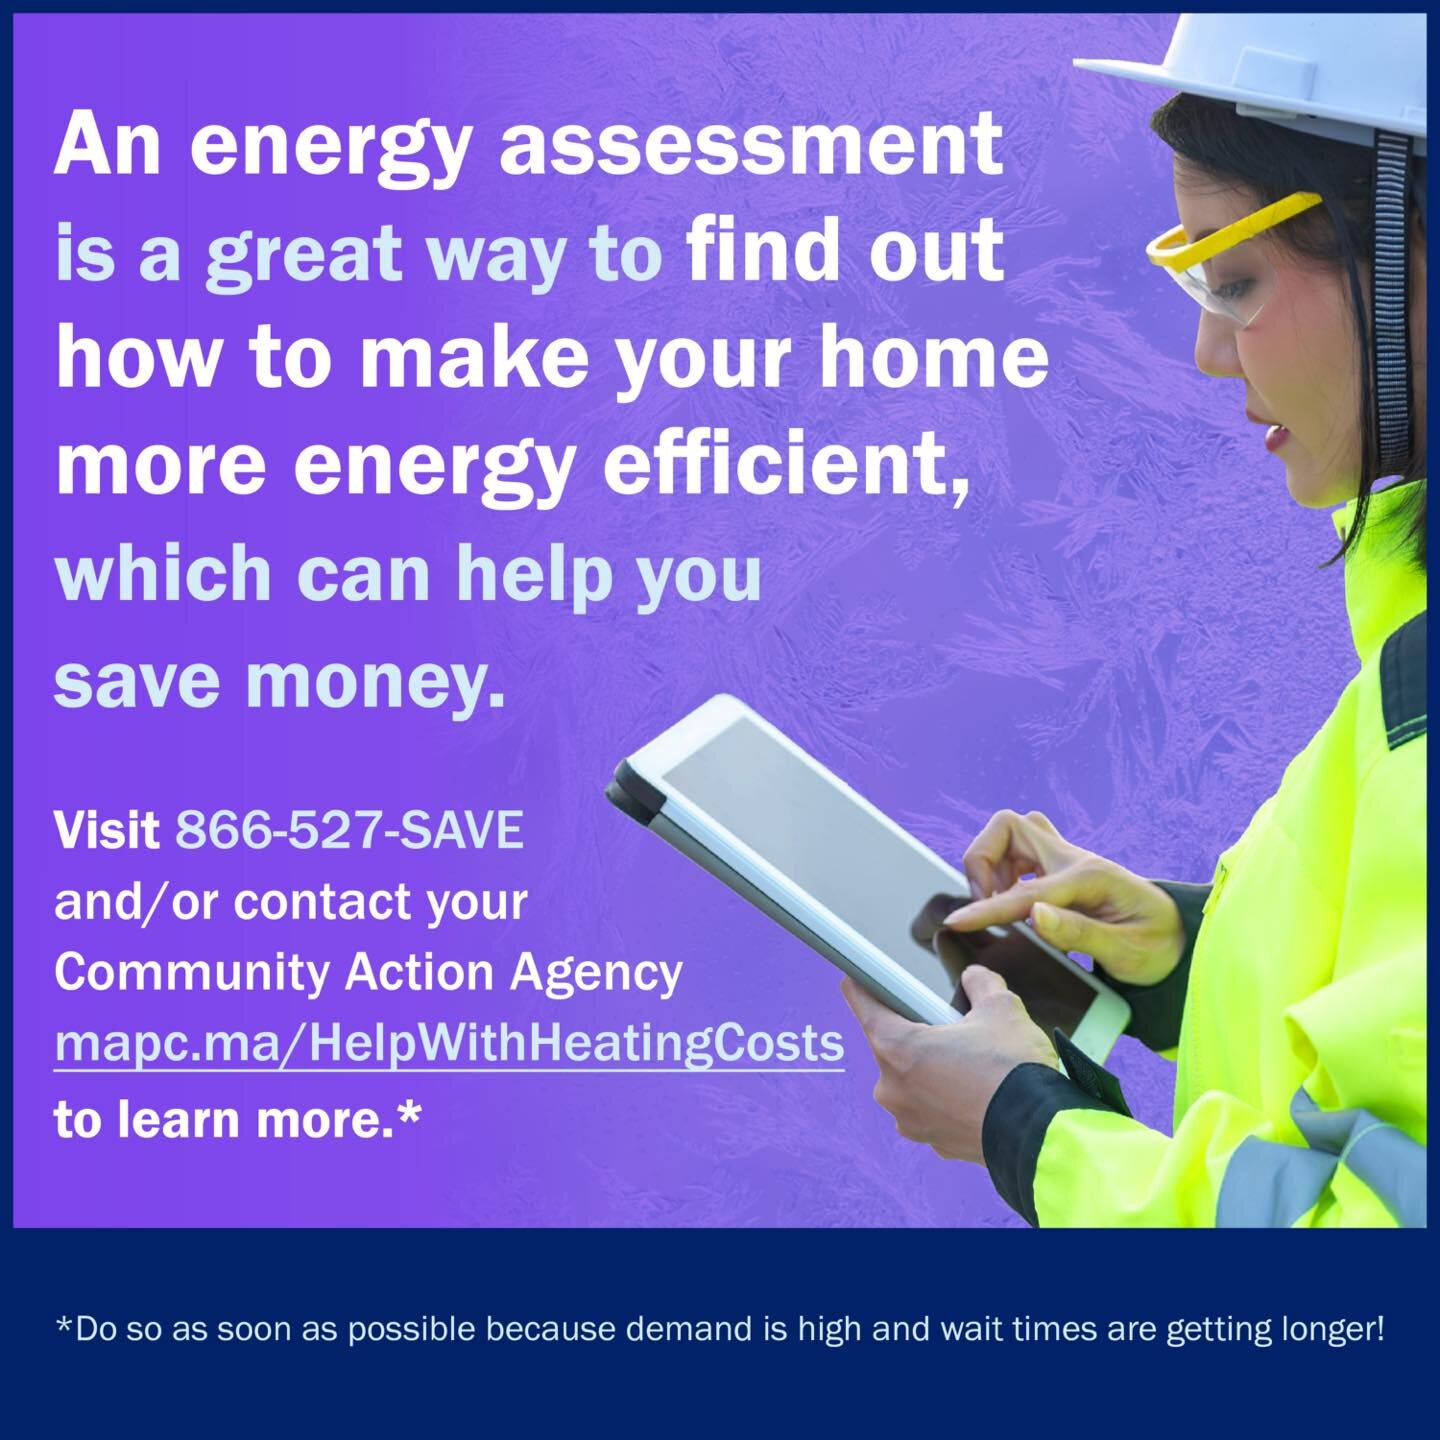 An energy assessment is a great way to find out how to make your home more energy efficient, which can help you save money. Call Mass Save (866-527-7283) and/or contact your Community Action Agency (mapc.ma/HelpWithHeatingCosts) to learn more. Do so 